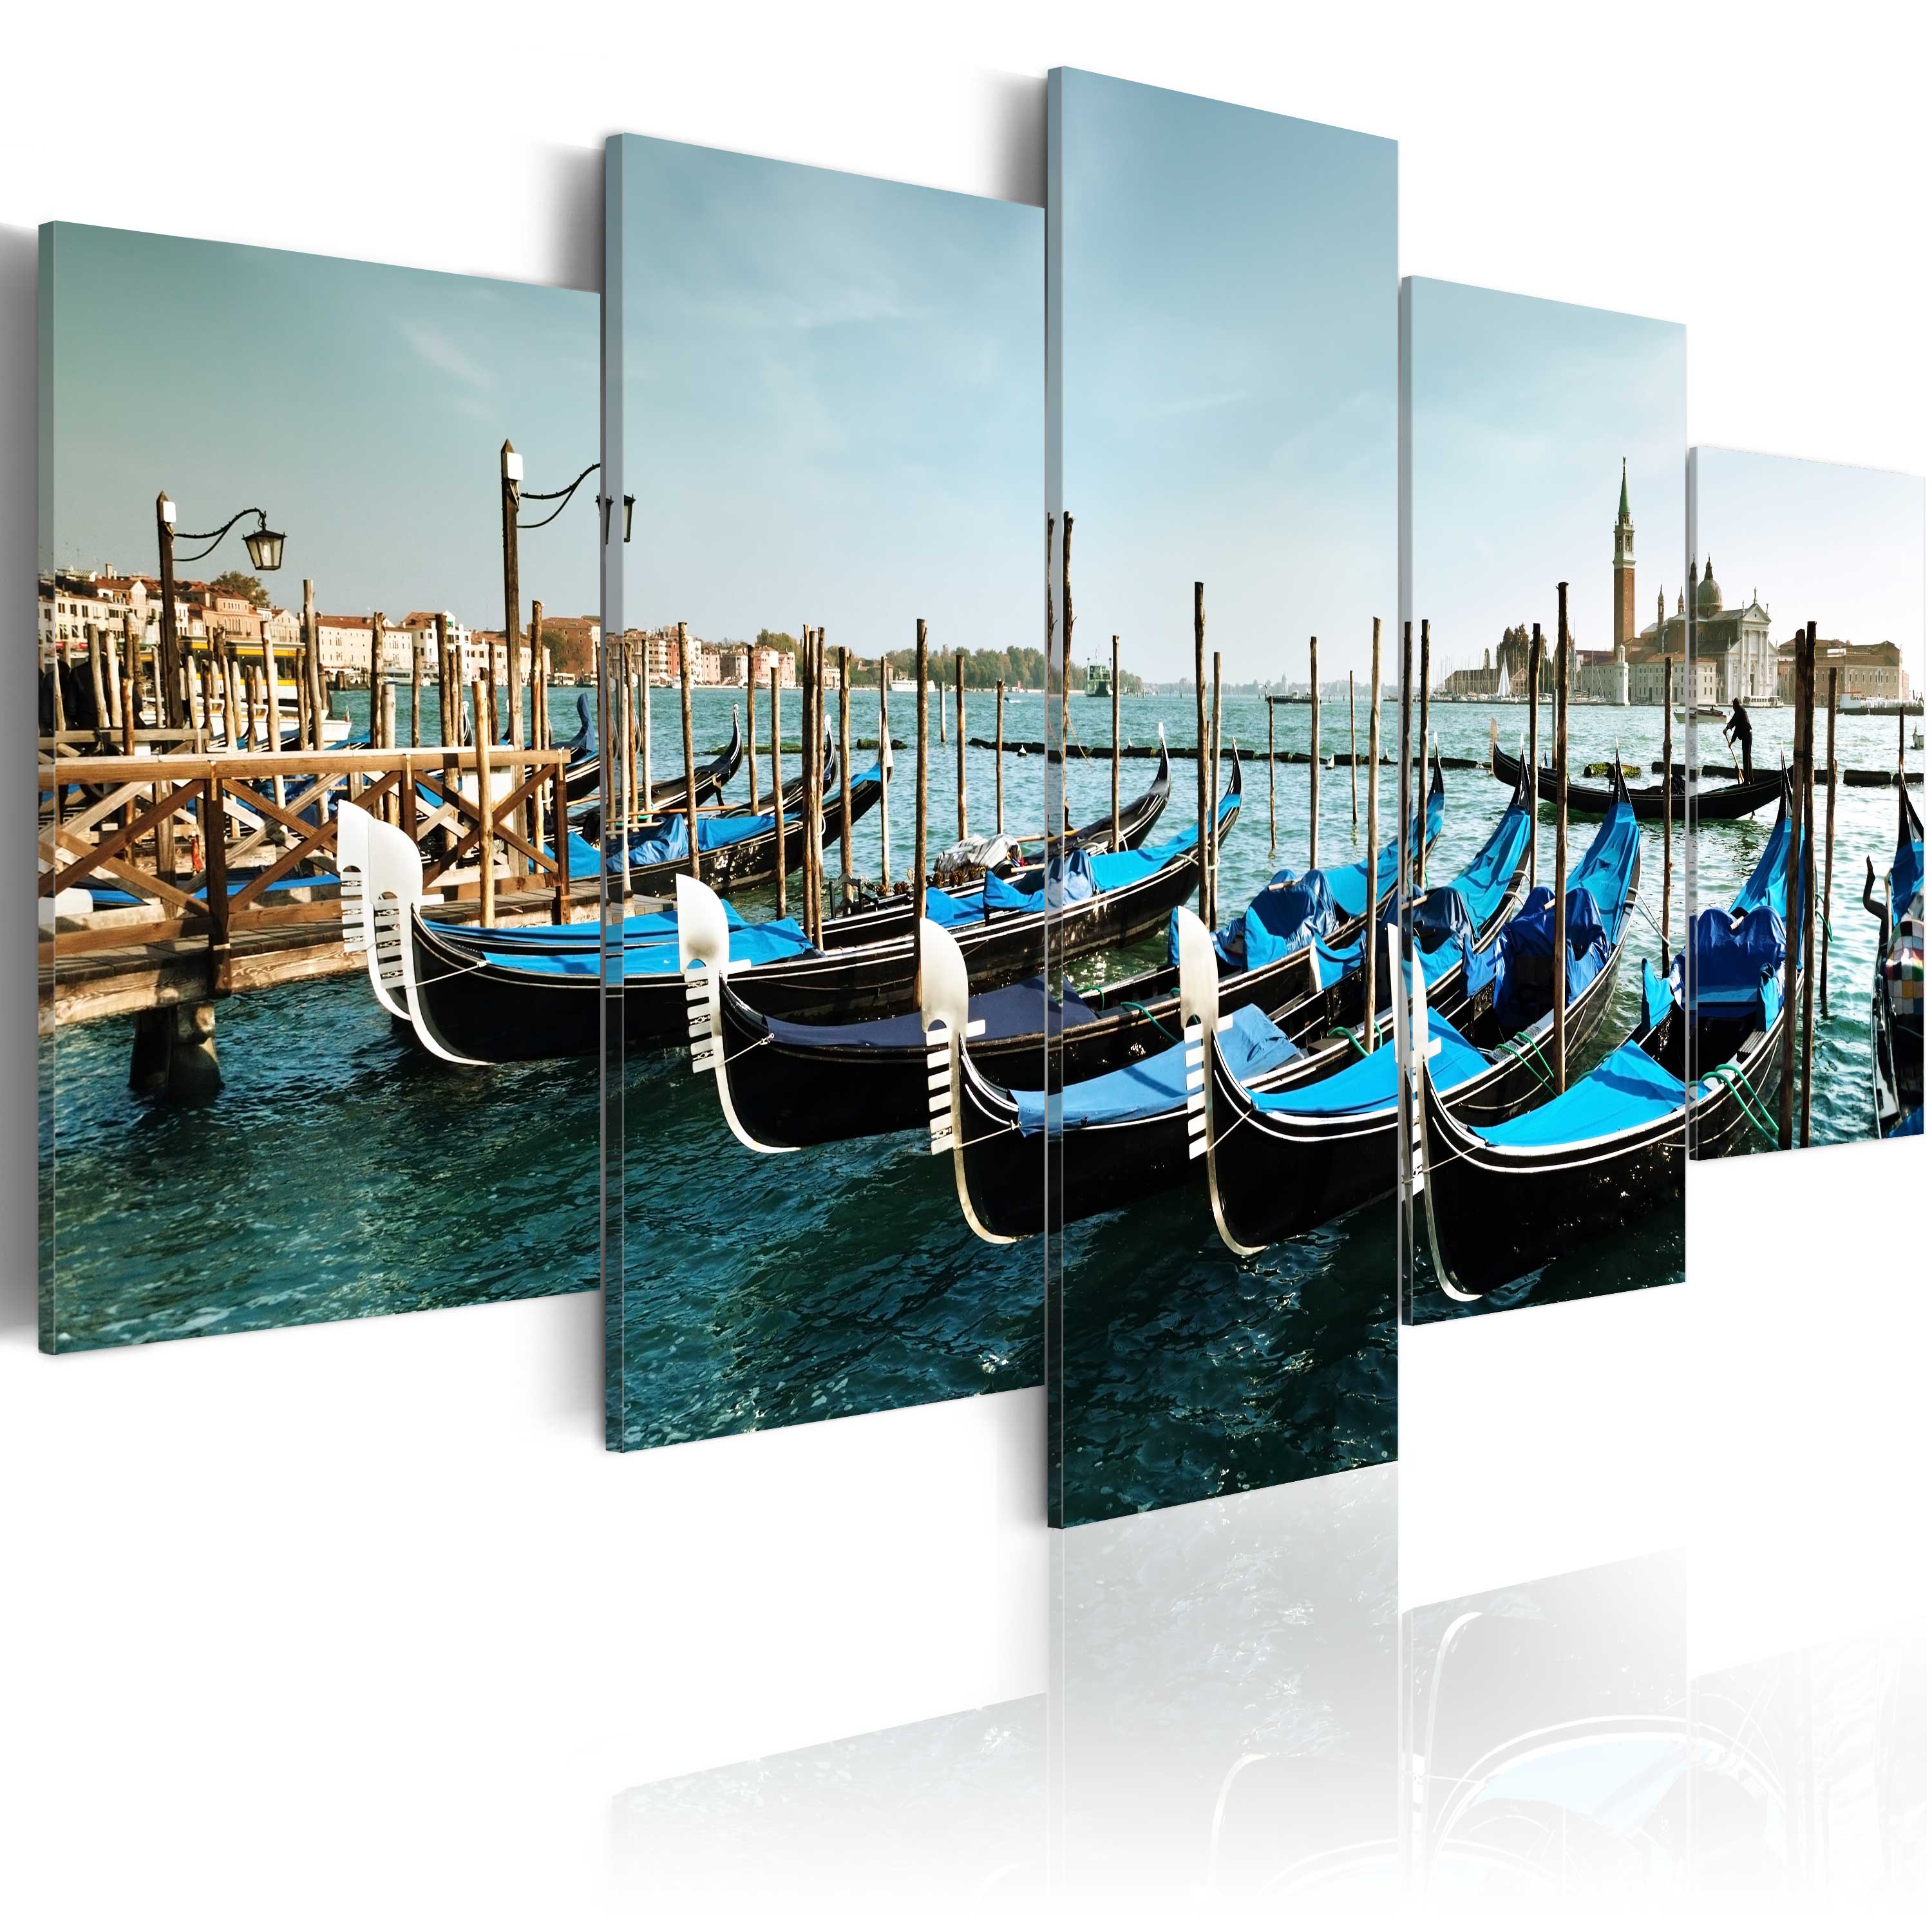 Canvas Print - A canal in Venice - 200x100